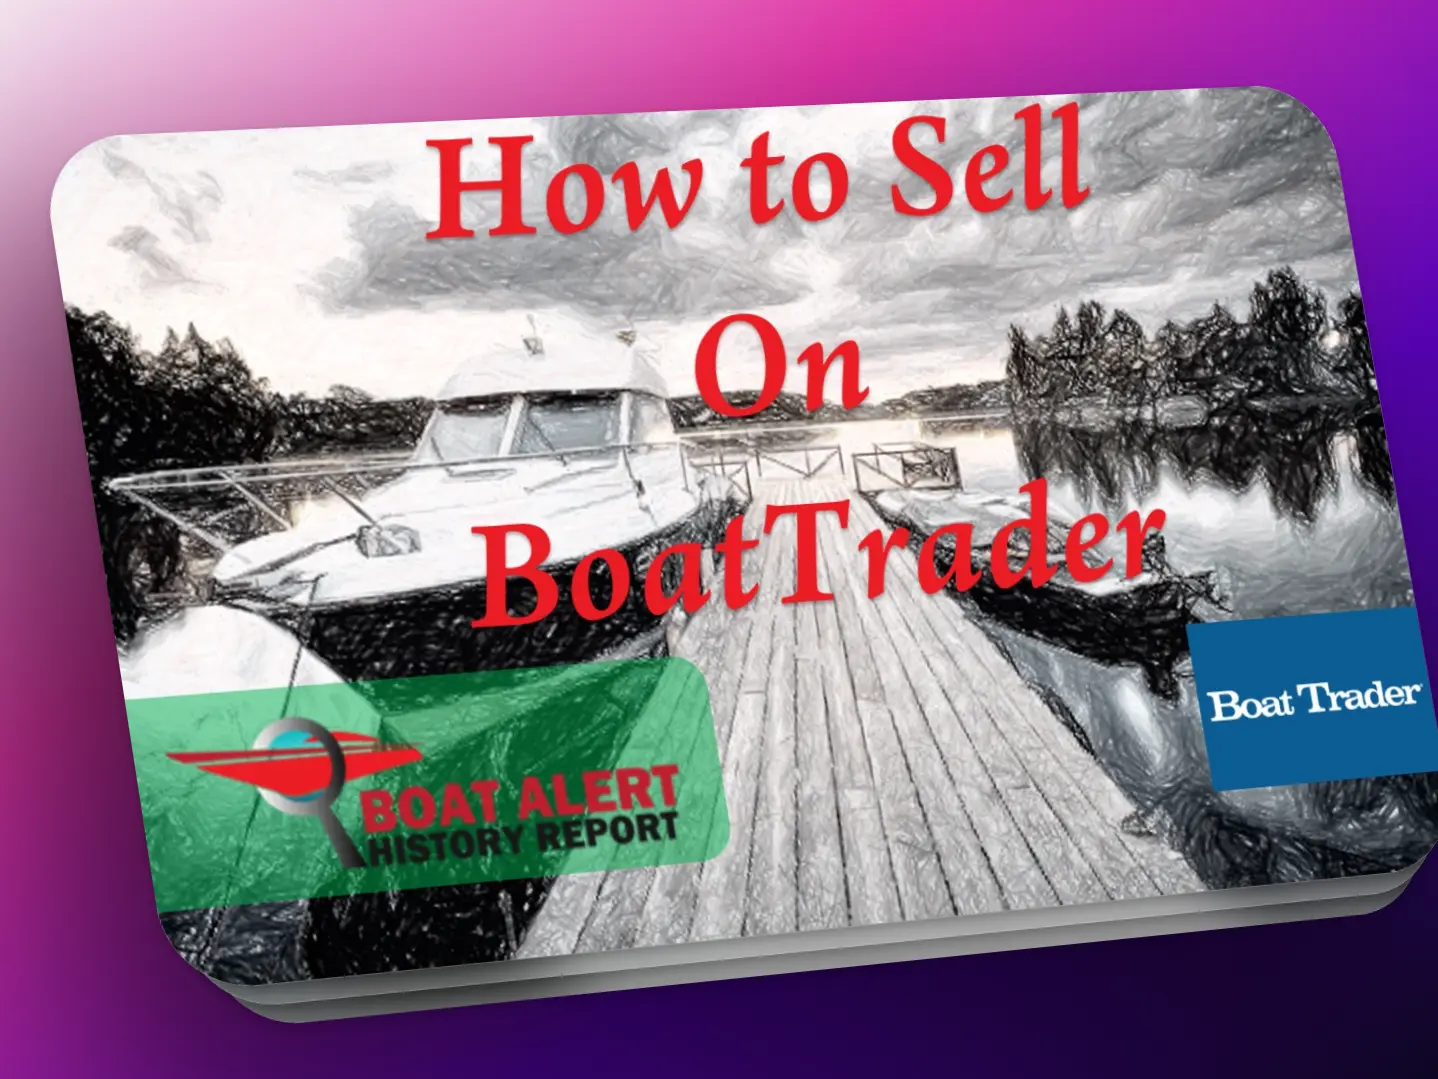 How To Sell a Boat on BoatTrader.com